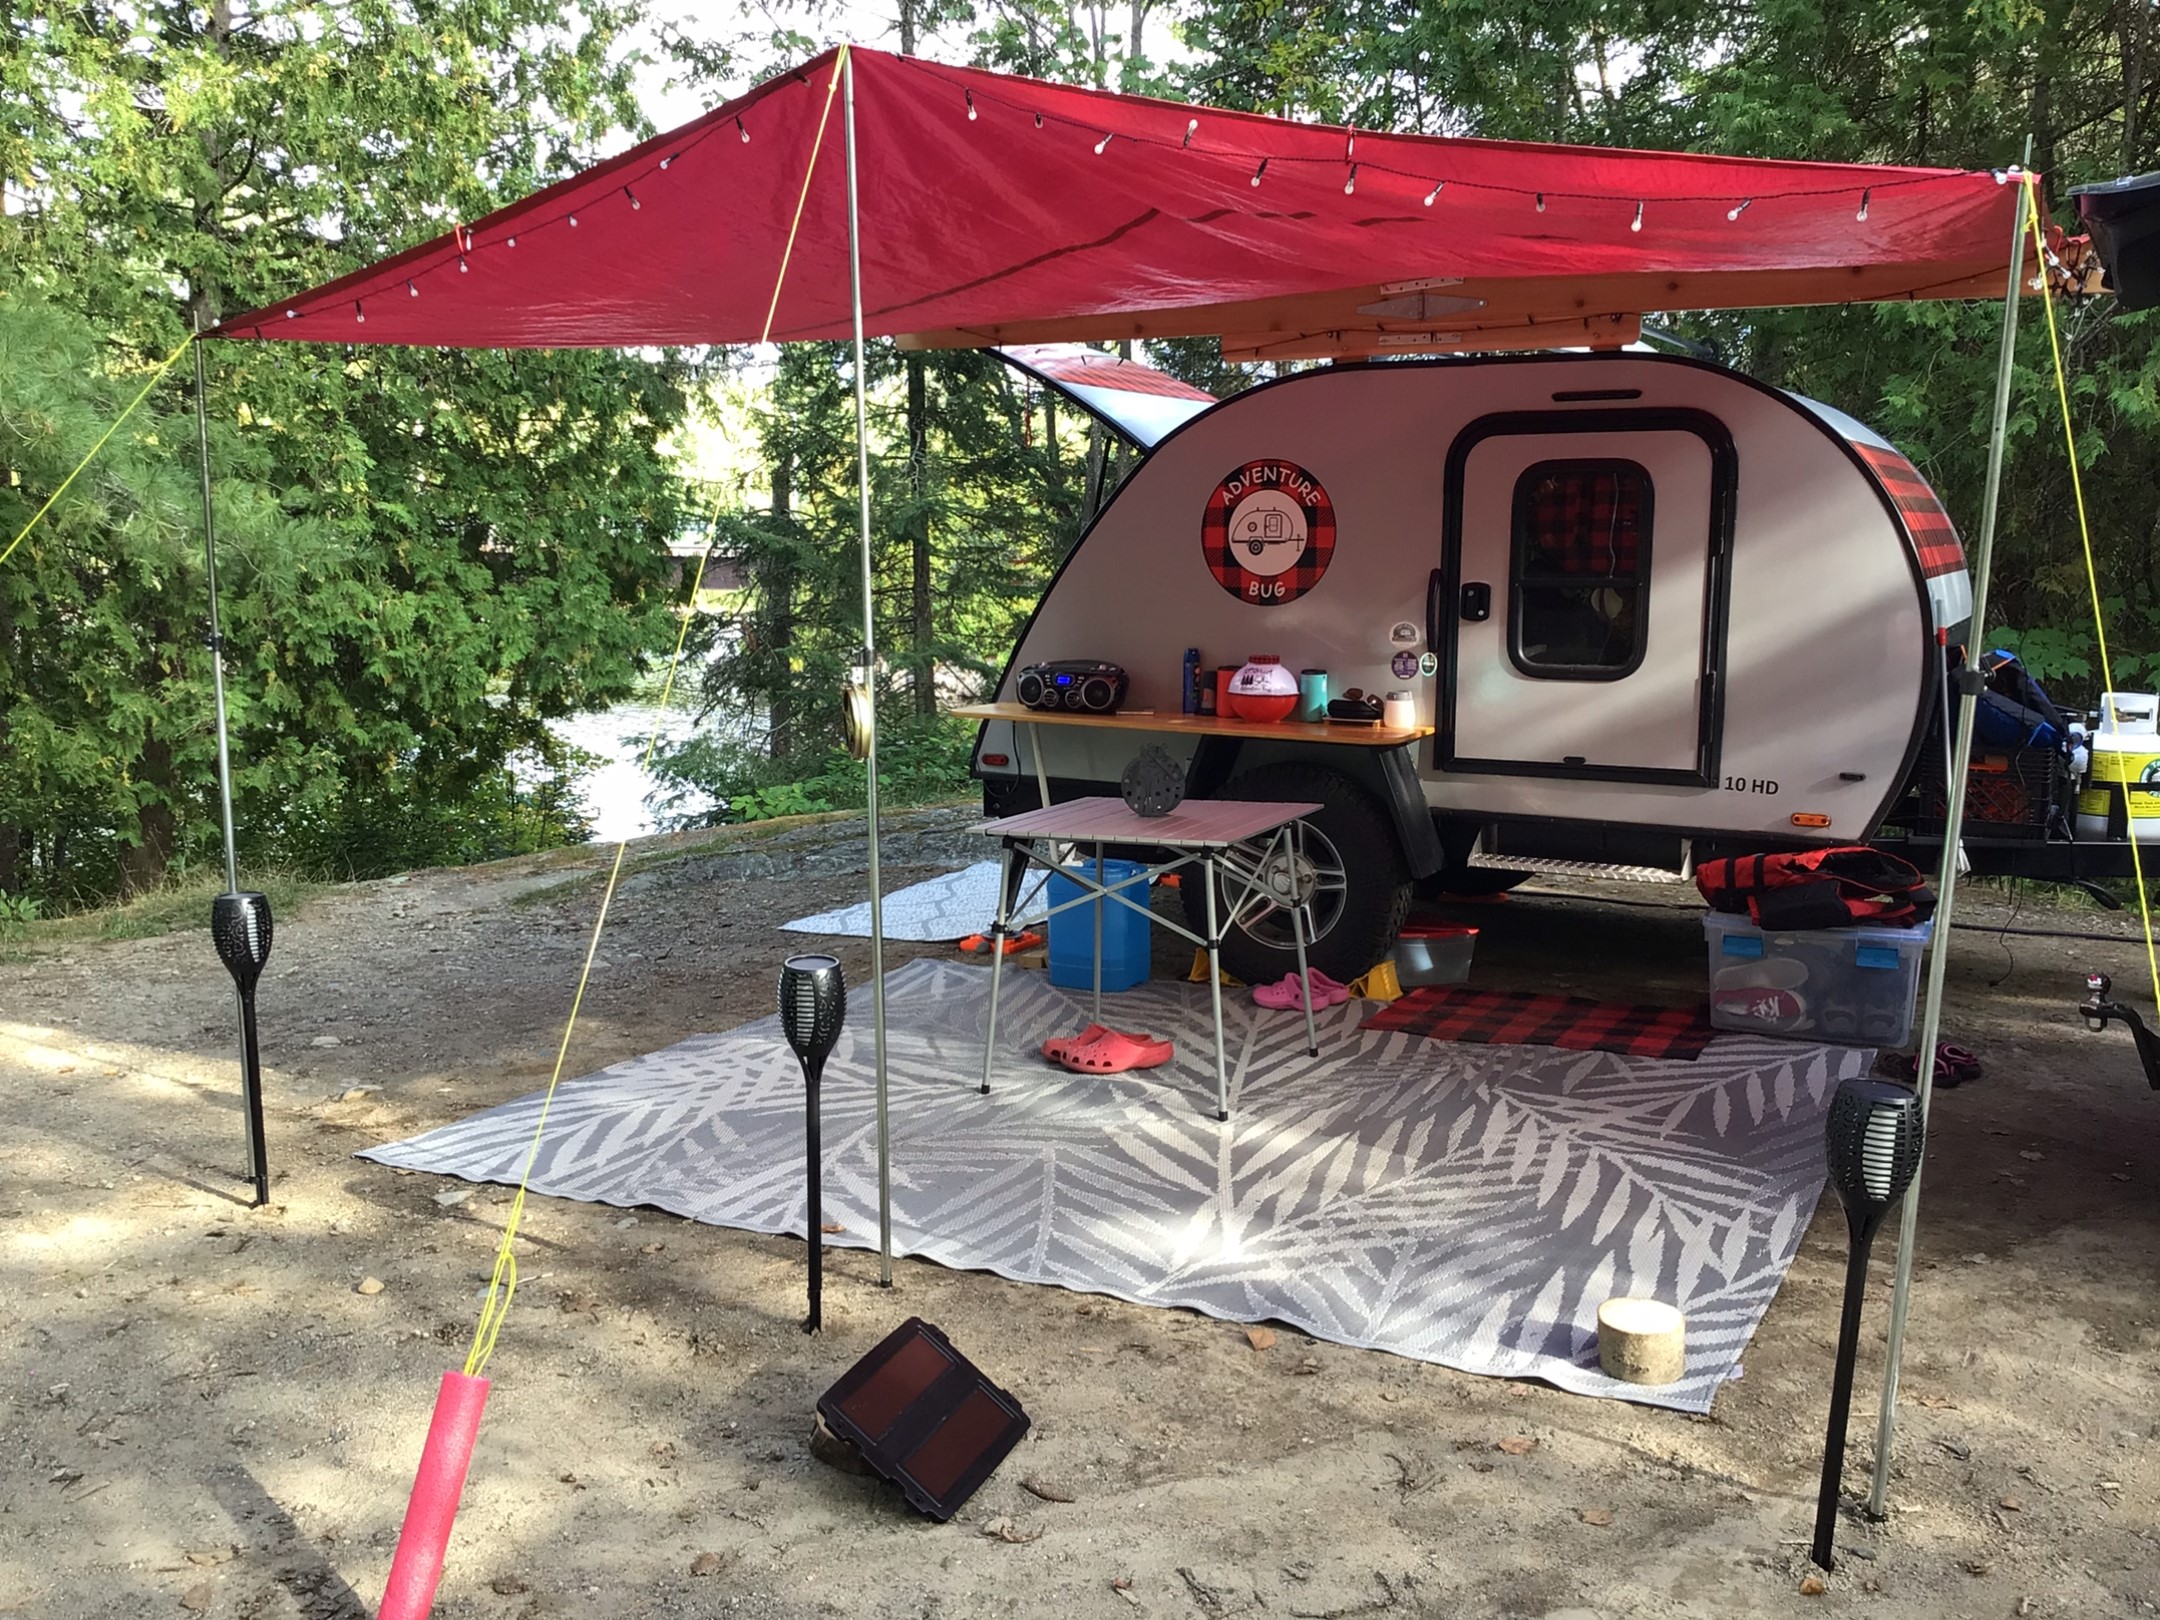 Adventure Bug - with D-I-Y canopy, wheel well shelf, picnic tables, and campsite rug.